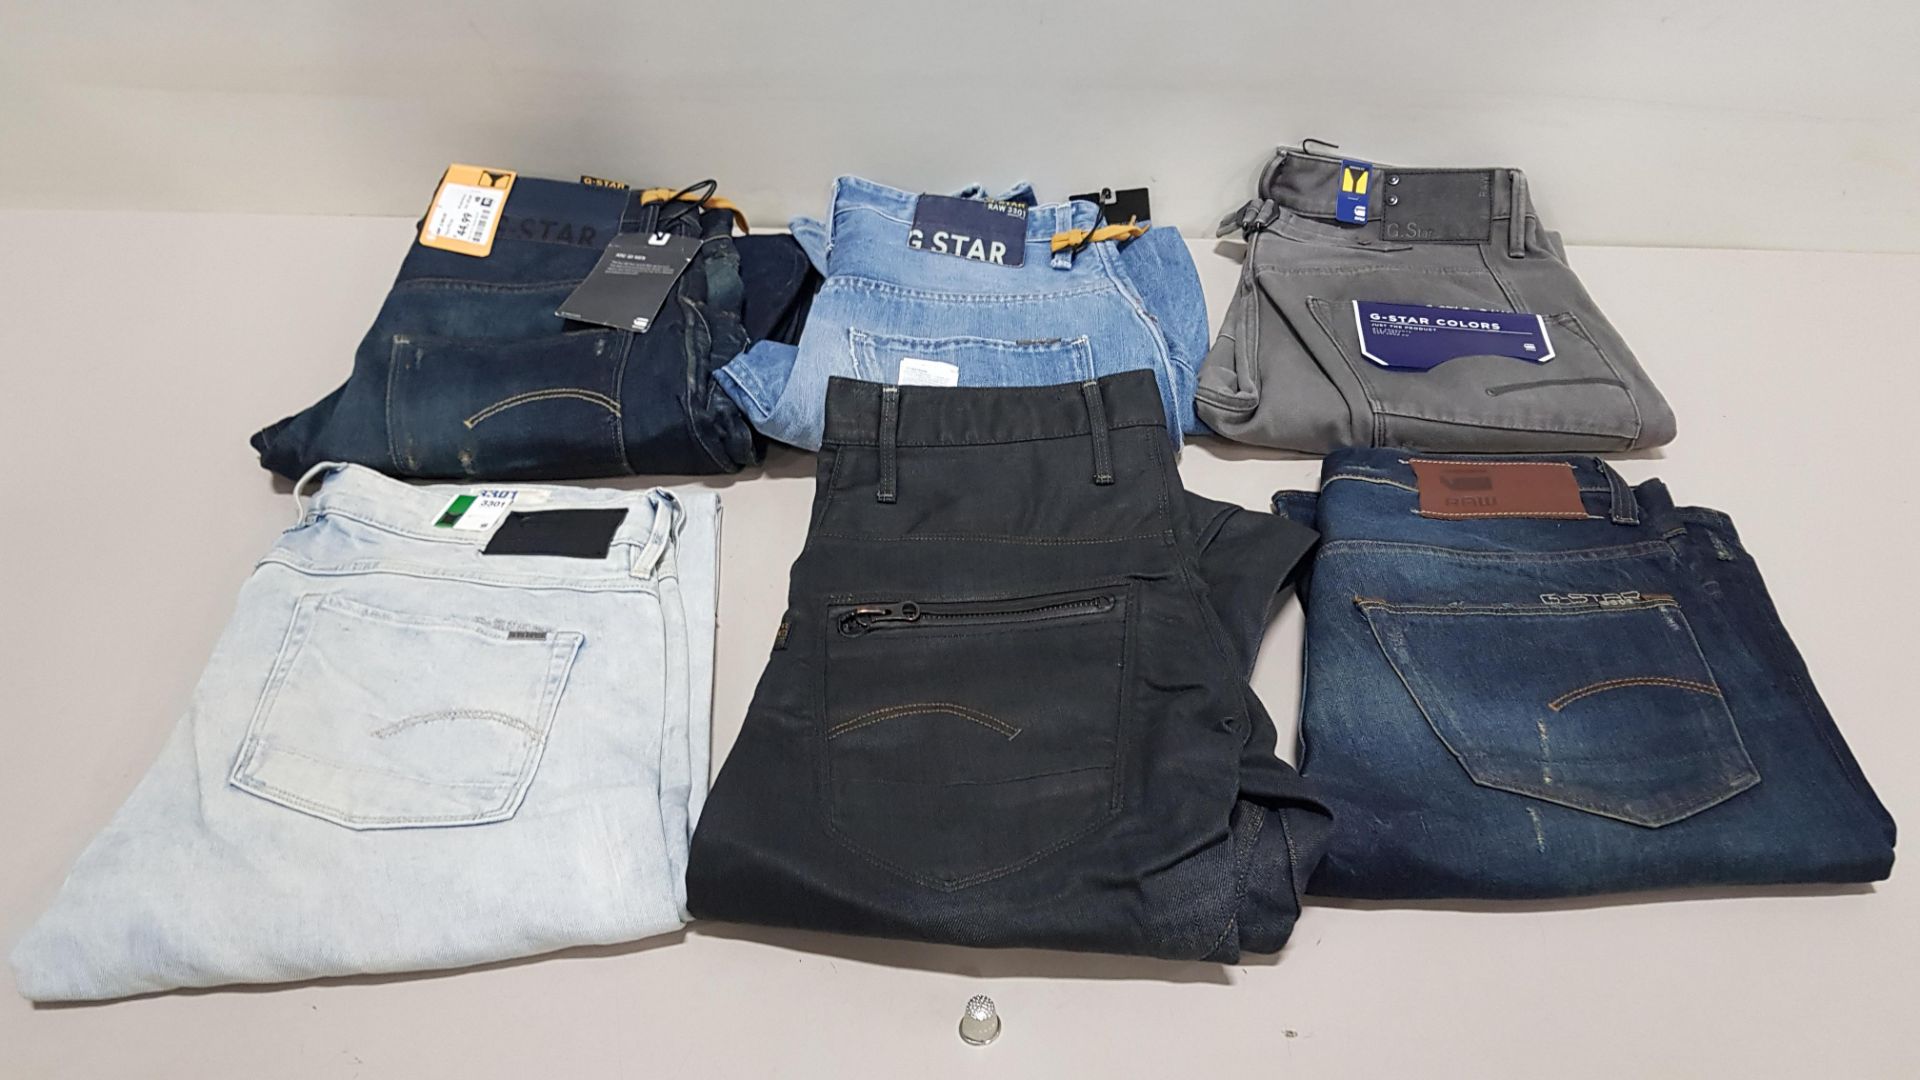 6 X PAIRS OF BRAND NEW G-STAR RAW JEANS IN VARIOUS STYLES & COLOURS IE. LIGHT BLUE, DARK BLUE,